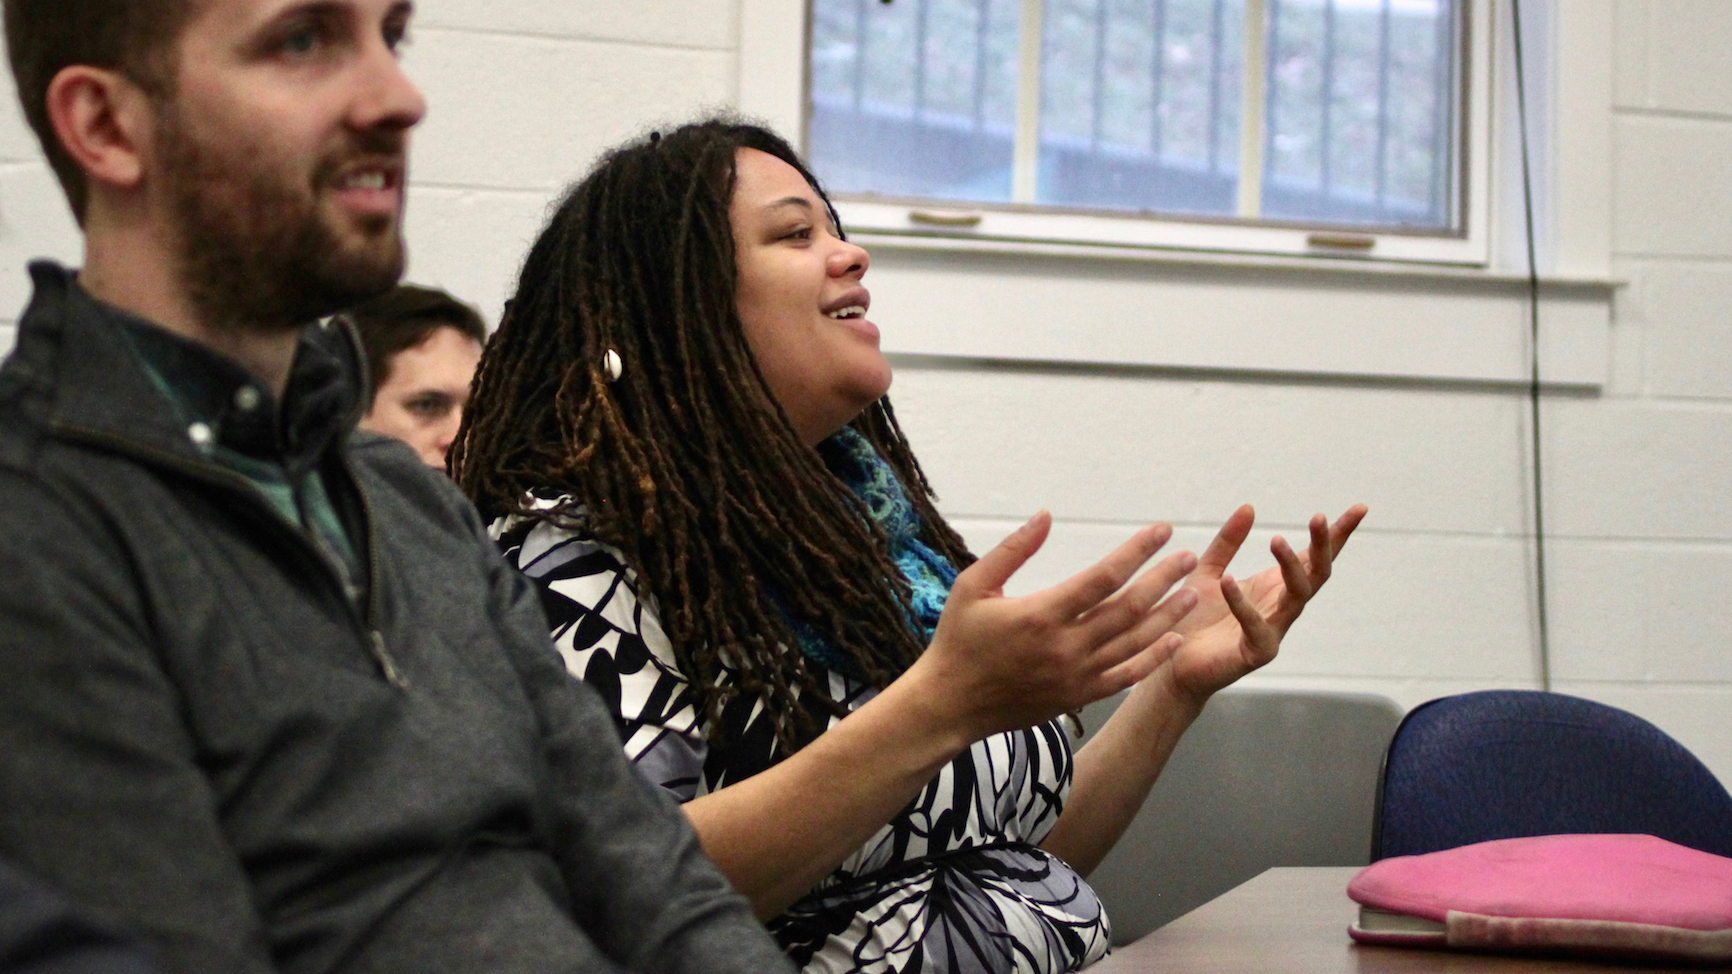 PhD student Alayo Tripp, seated, gesturing forward with her hands, contributing to a conversation